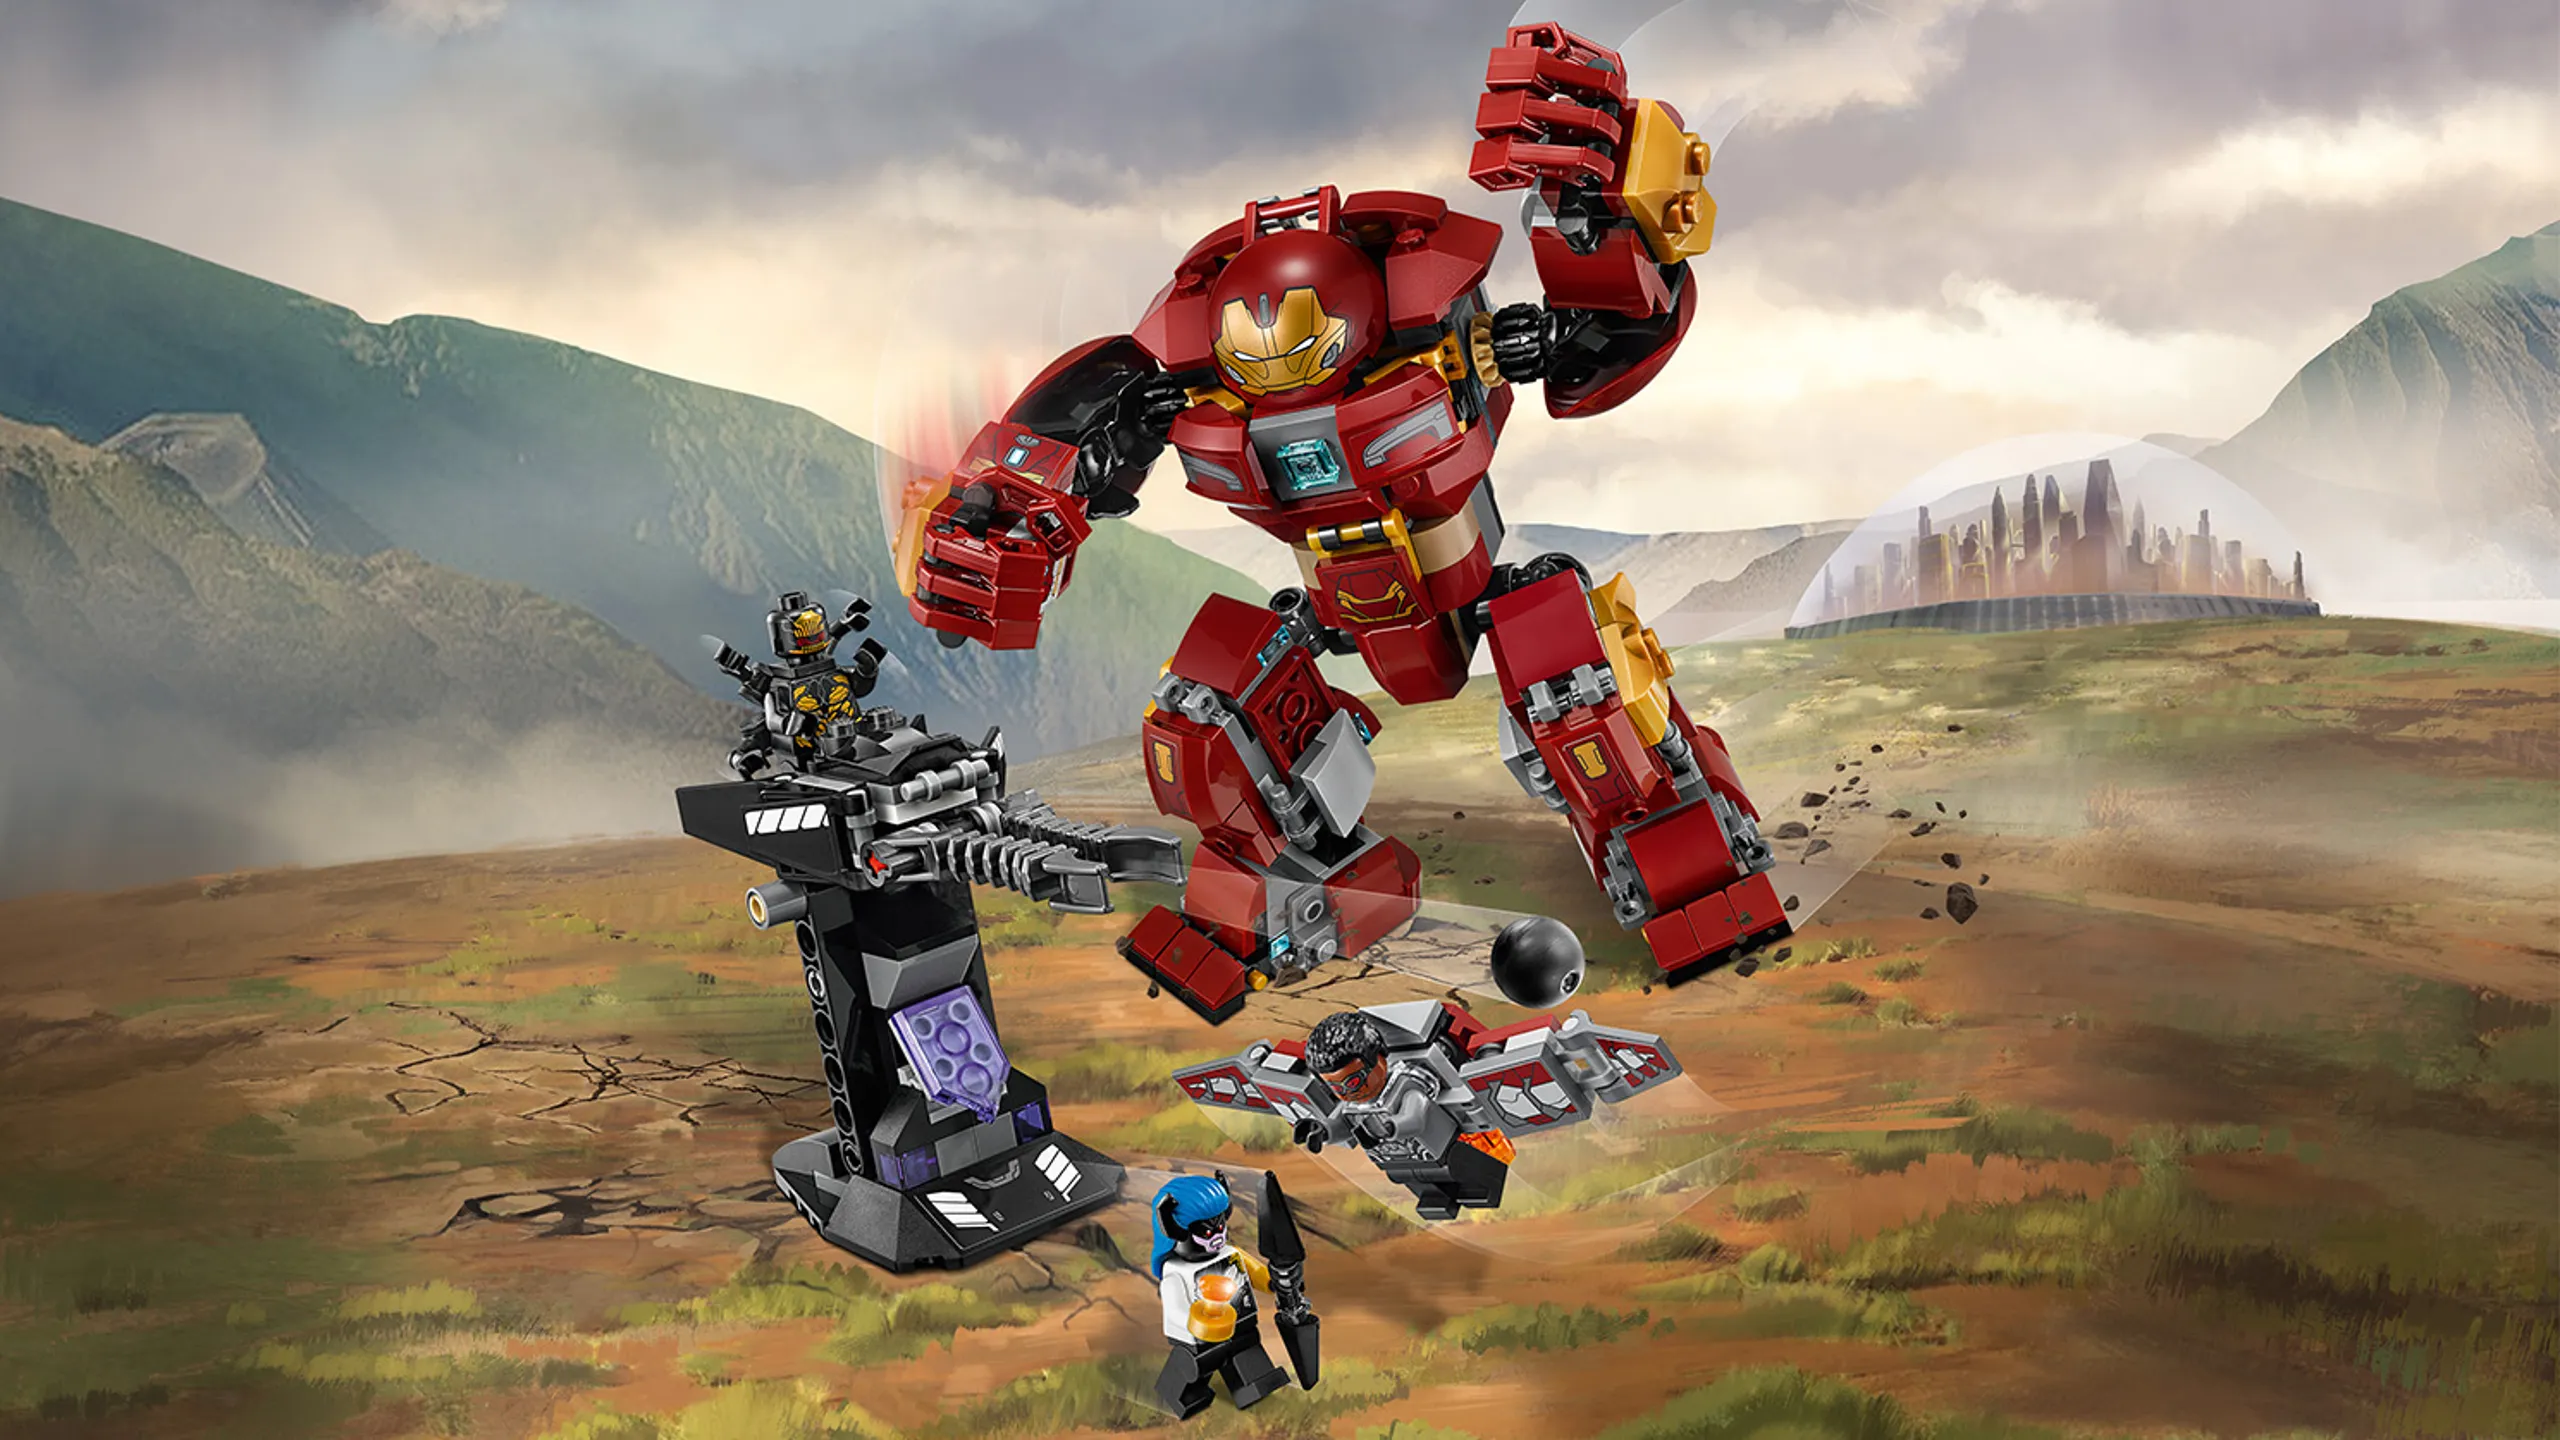 LEGO Super Heroes - 76104 The Hulkbuster Smash-Up - Proxima Midnight has taken over the gun turret and is shooting at Bruce Banner’s Hulkbuster